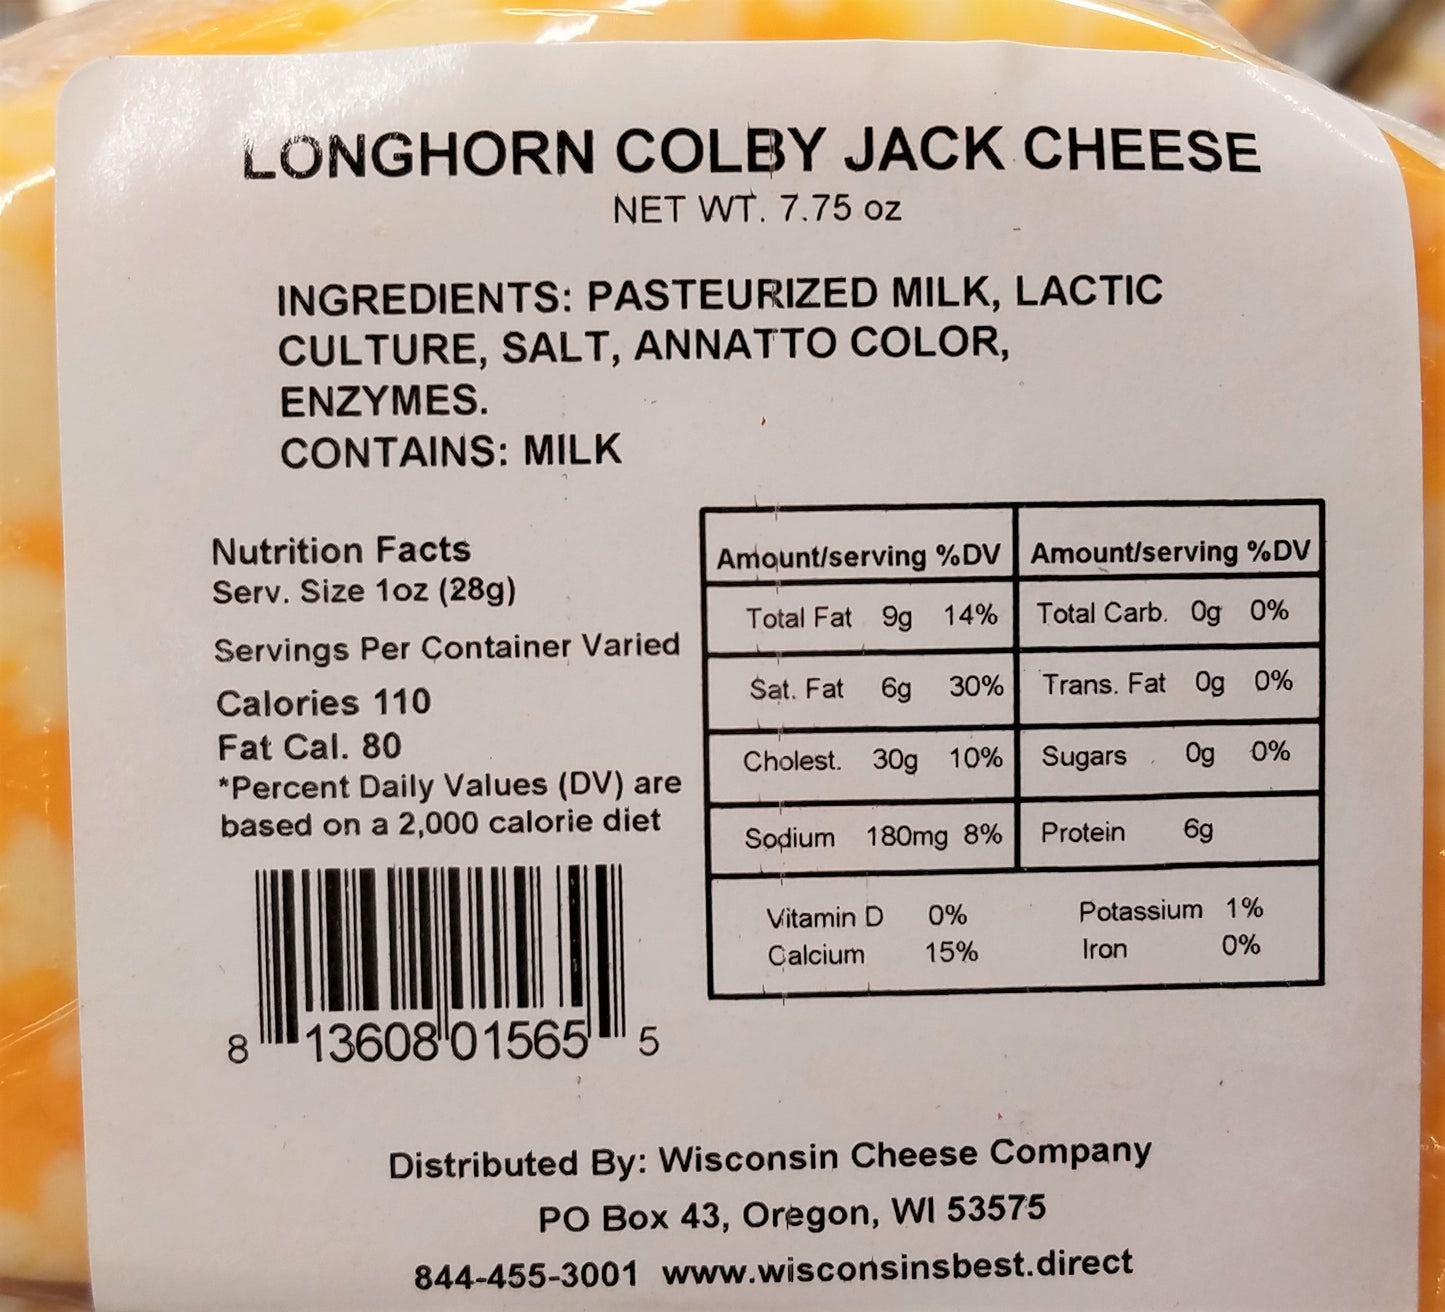 Longhorn Colby Jack Cheese Blocks, 7 oz. Per Block, Wisconsin Cheese Company™ Cheese and Cracker Snack